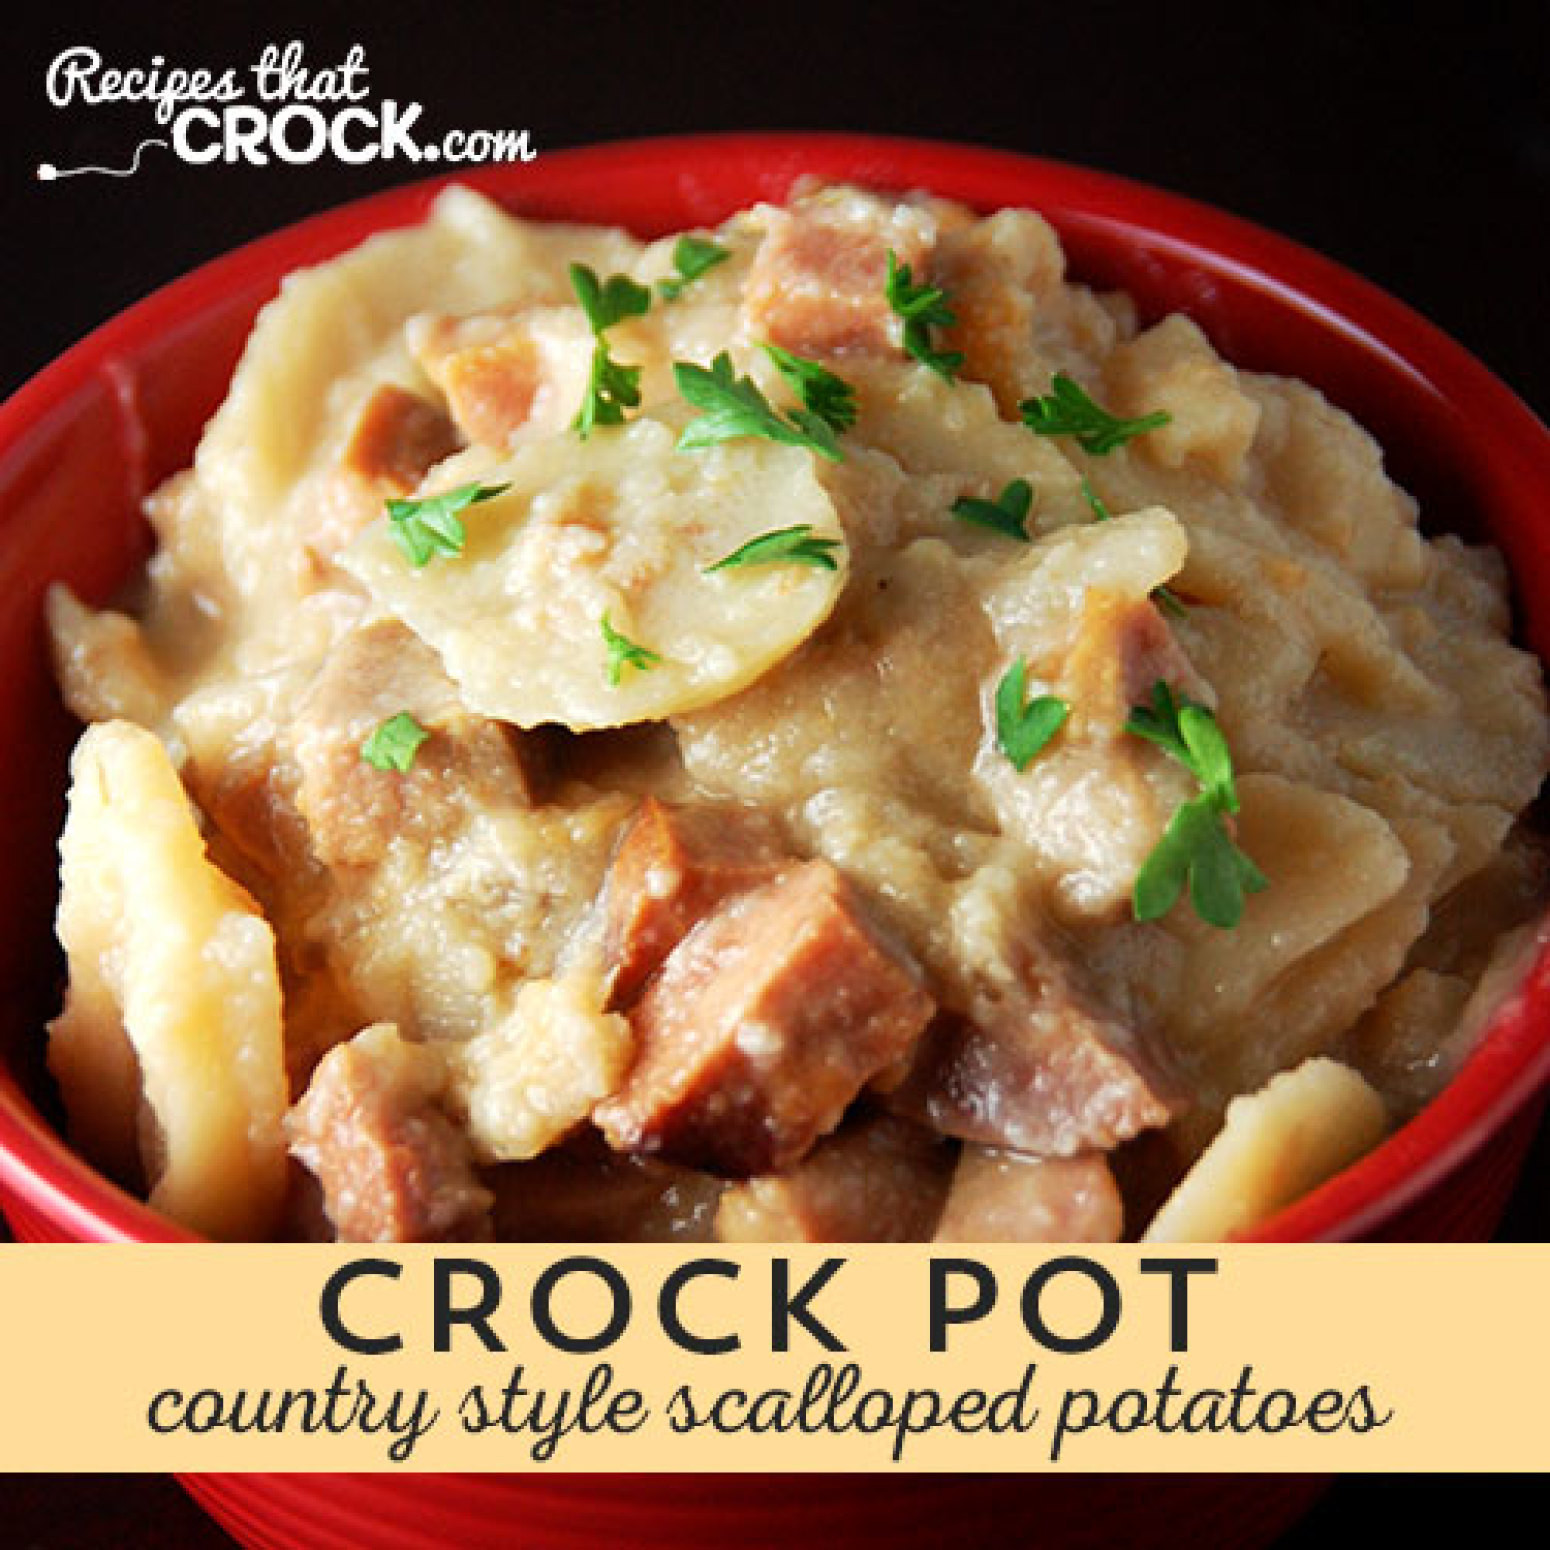 Scalloped Potatoes In Crock Pot
 Country Style Scalloped Potatoes Crock Pot Recipe